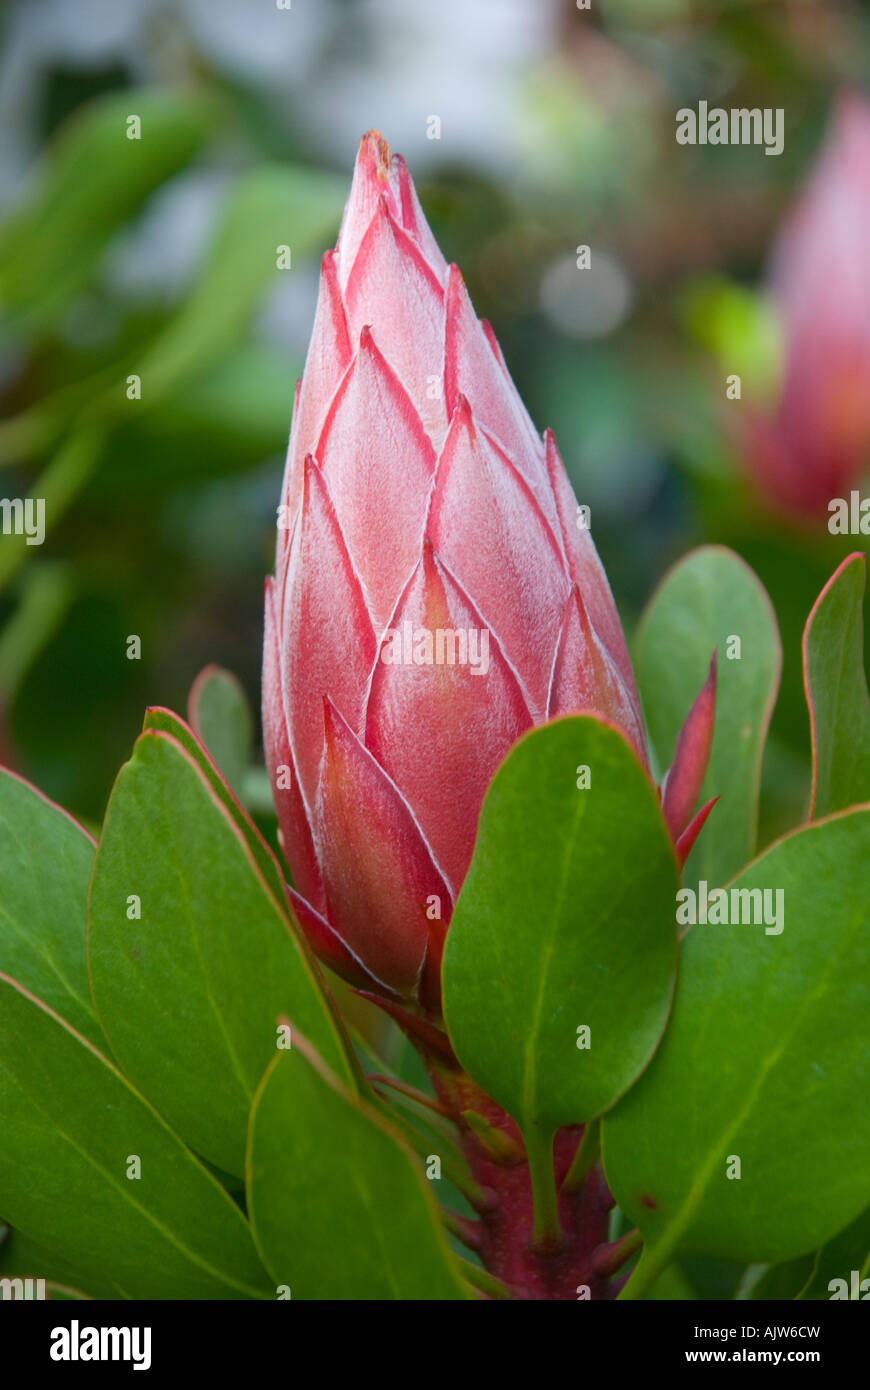 A protea flower variety Little Prince Stock Photo